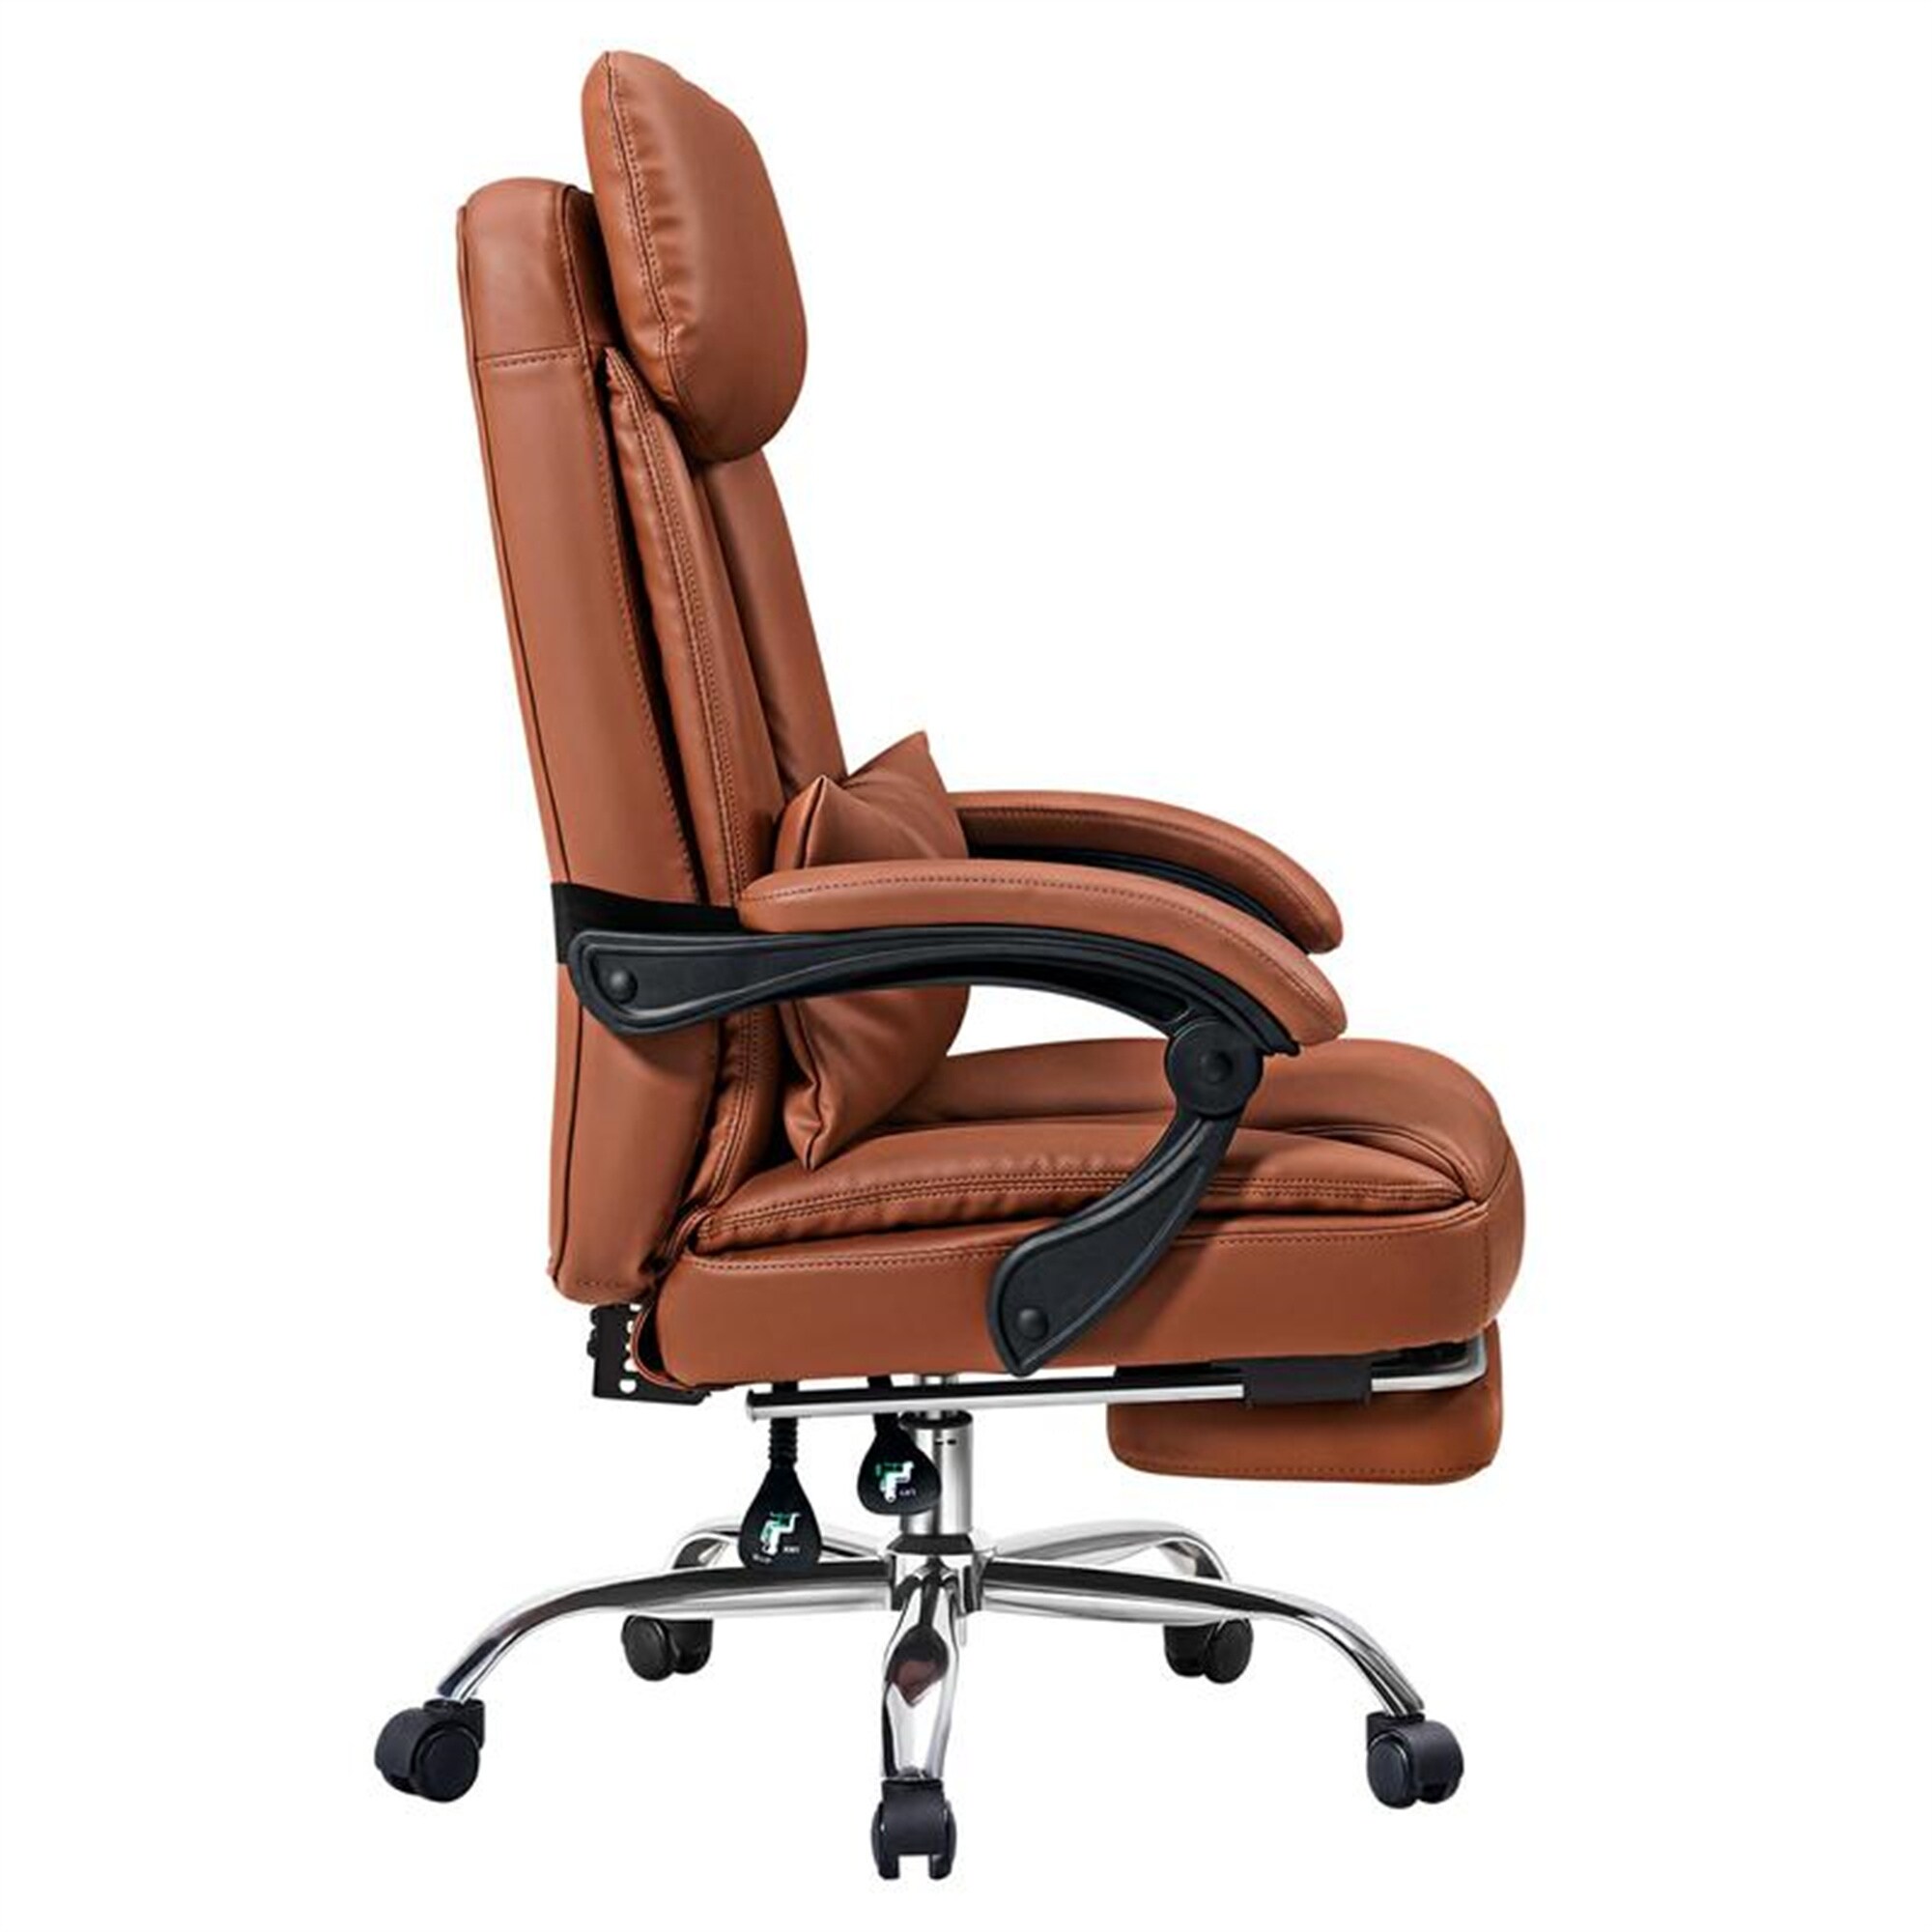 https://ak1.ostkcdn.com/images/products/is/images/direct/ae79f272d53bc1575a2b30b2a58255393846d5e2/Executive-Chair%2C-High-Back-Leather-Desk-Chair-W--Retractable-Footrest.jpg